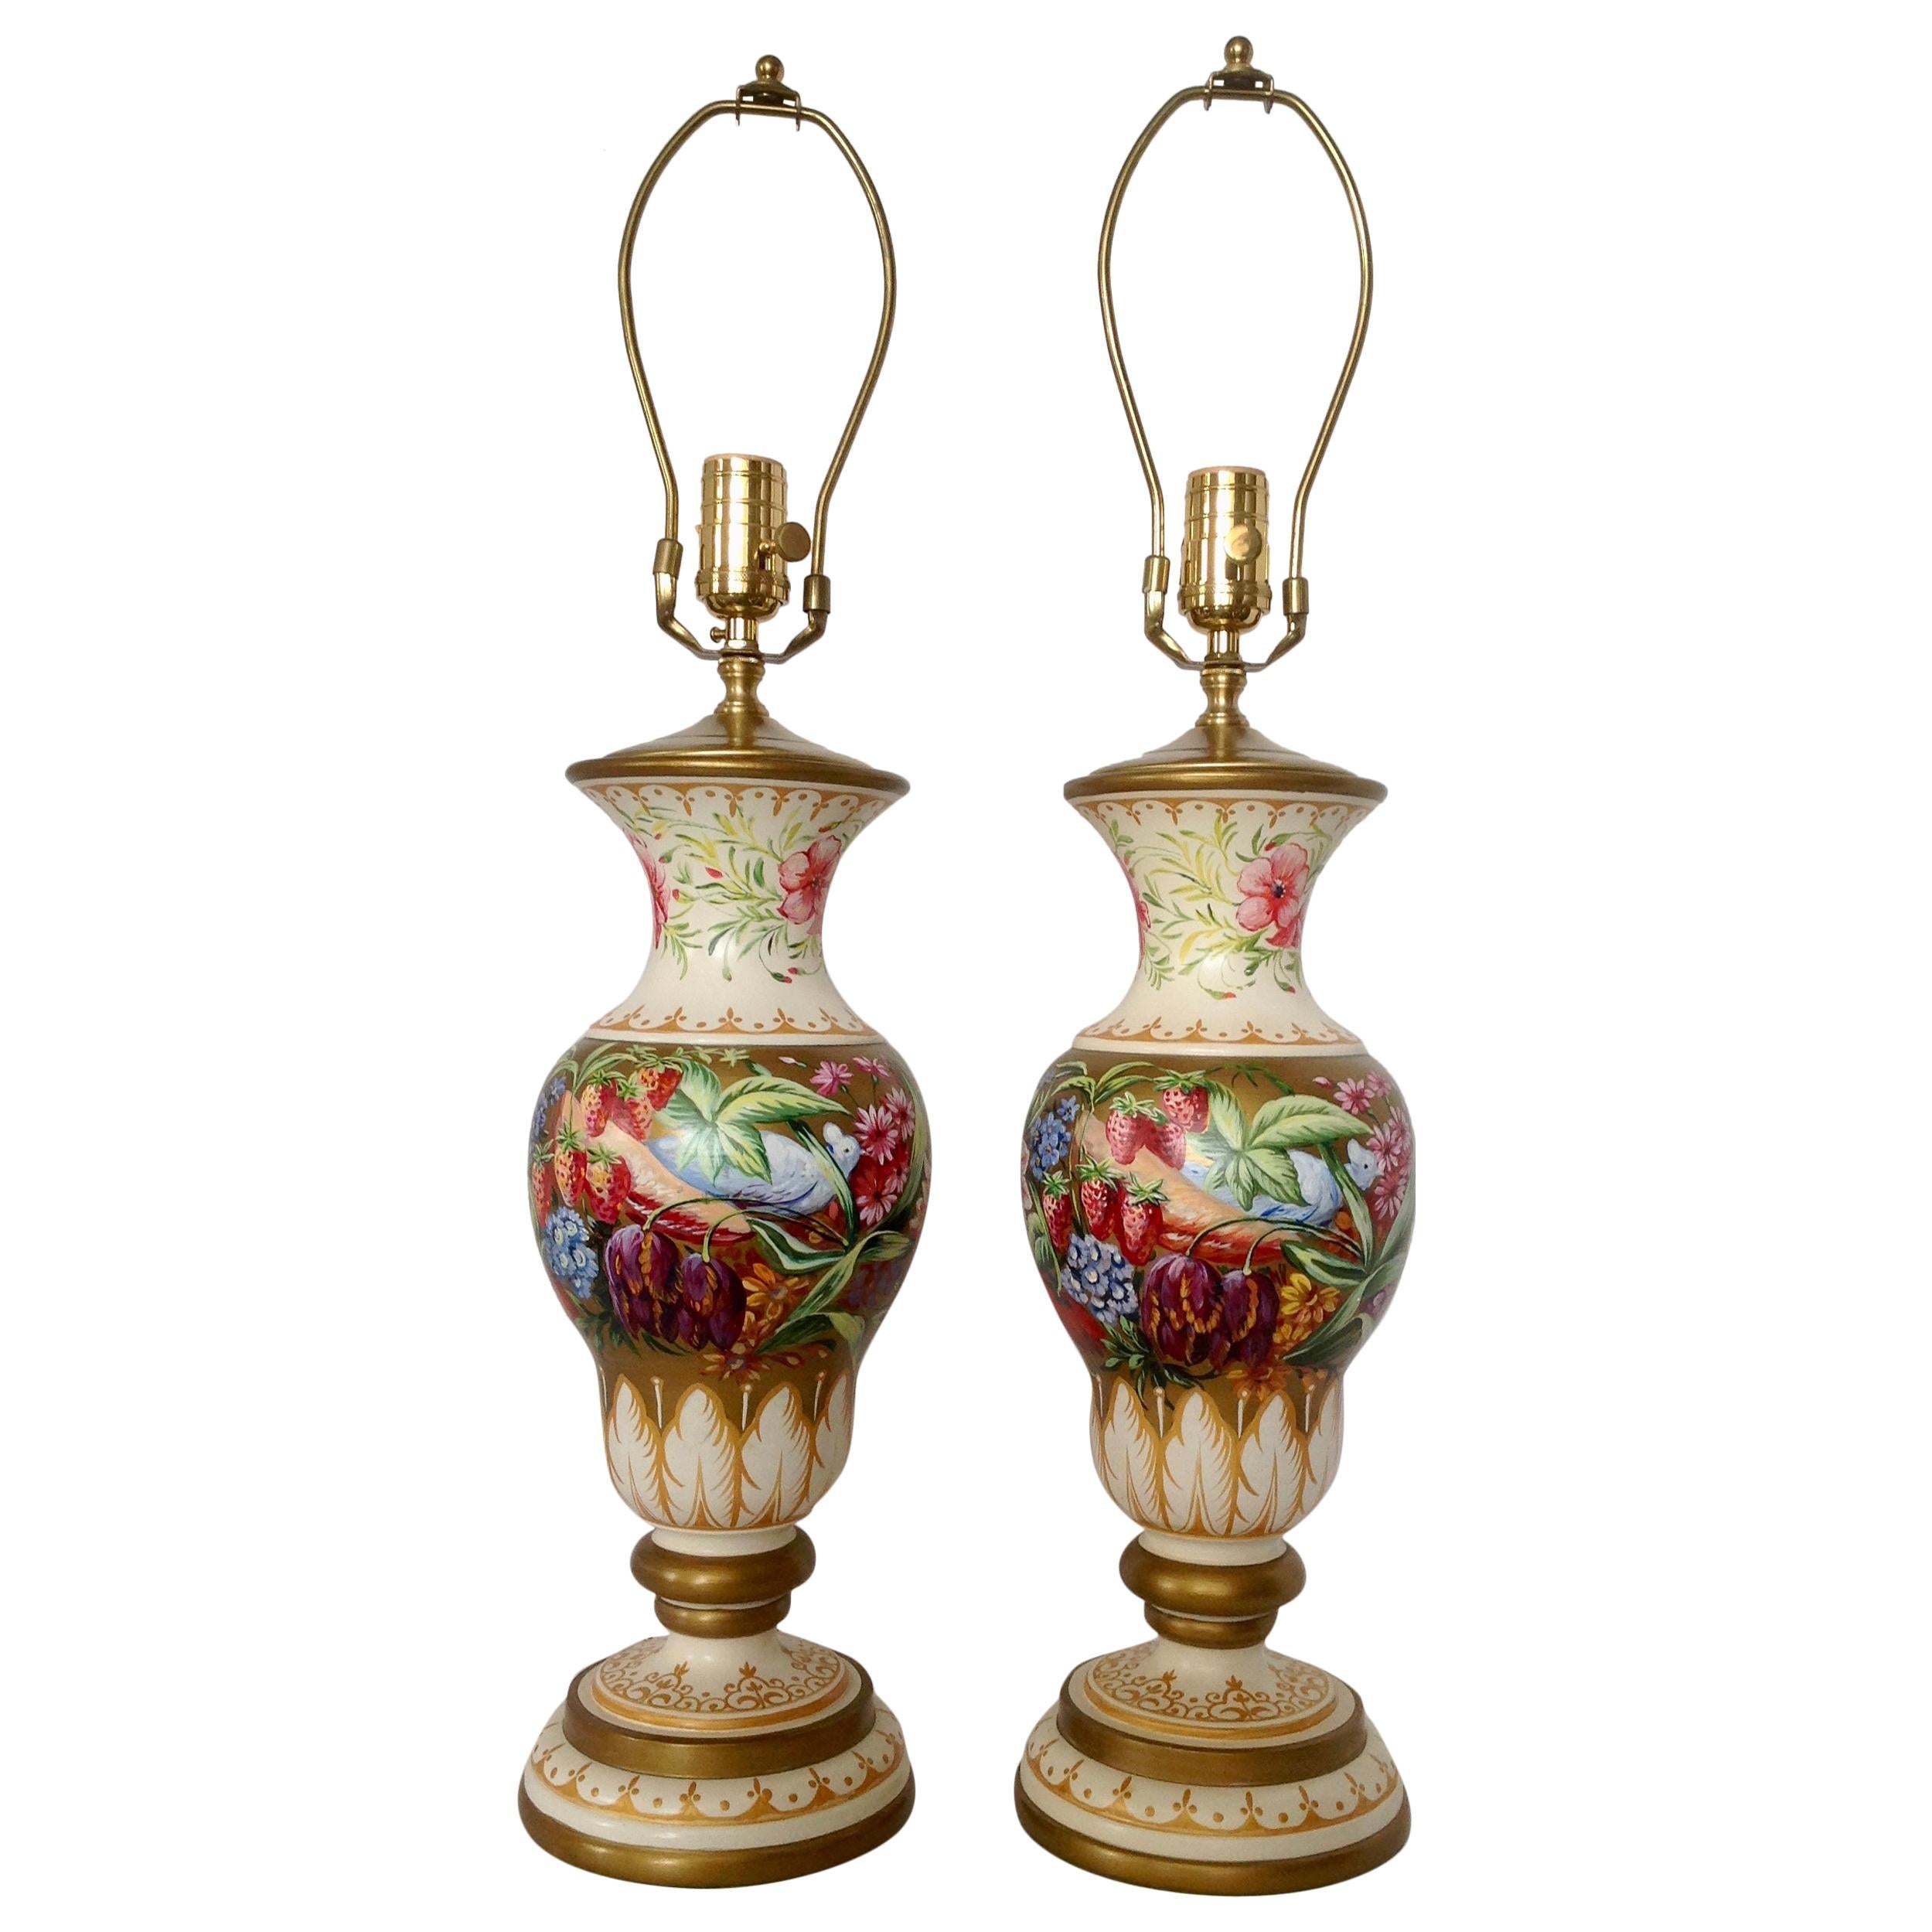 Pair of Hand Painted Urns Mounted as Table Lamps